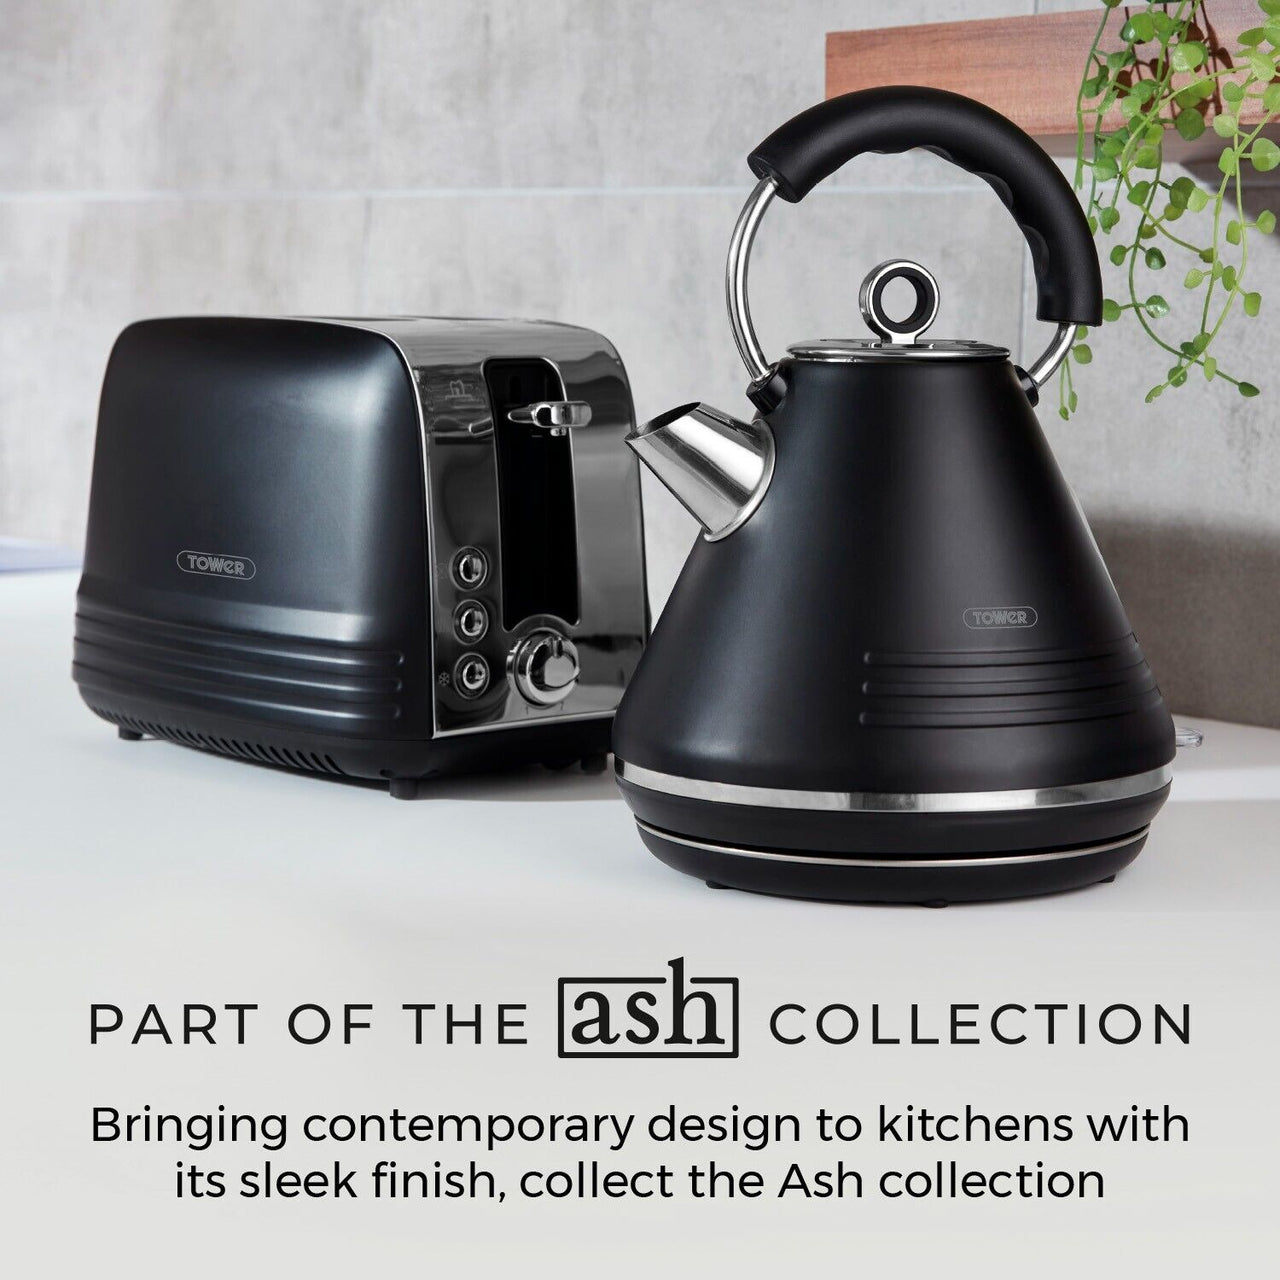 Tower Ash Black 1.7L 3KW Pyramid Kettle & 2 Slice Toaster Contemporary Set with Chrome Accents